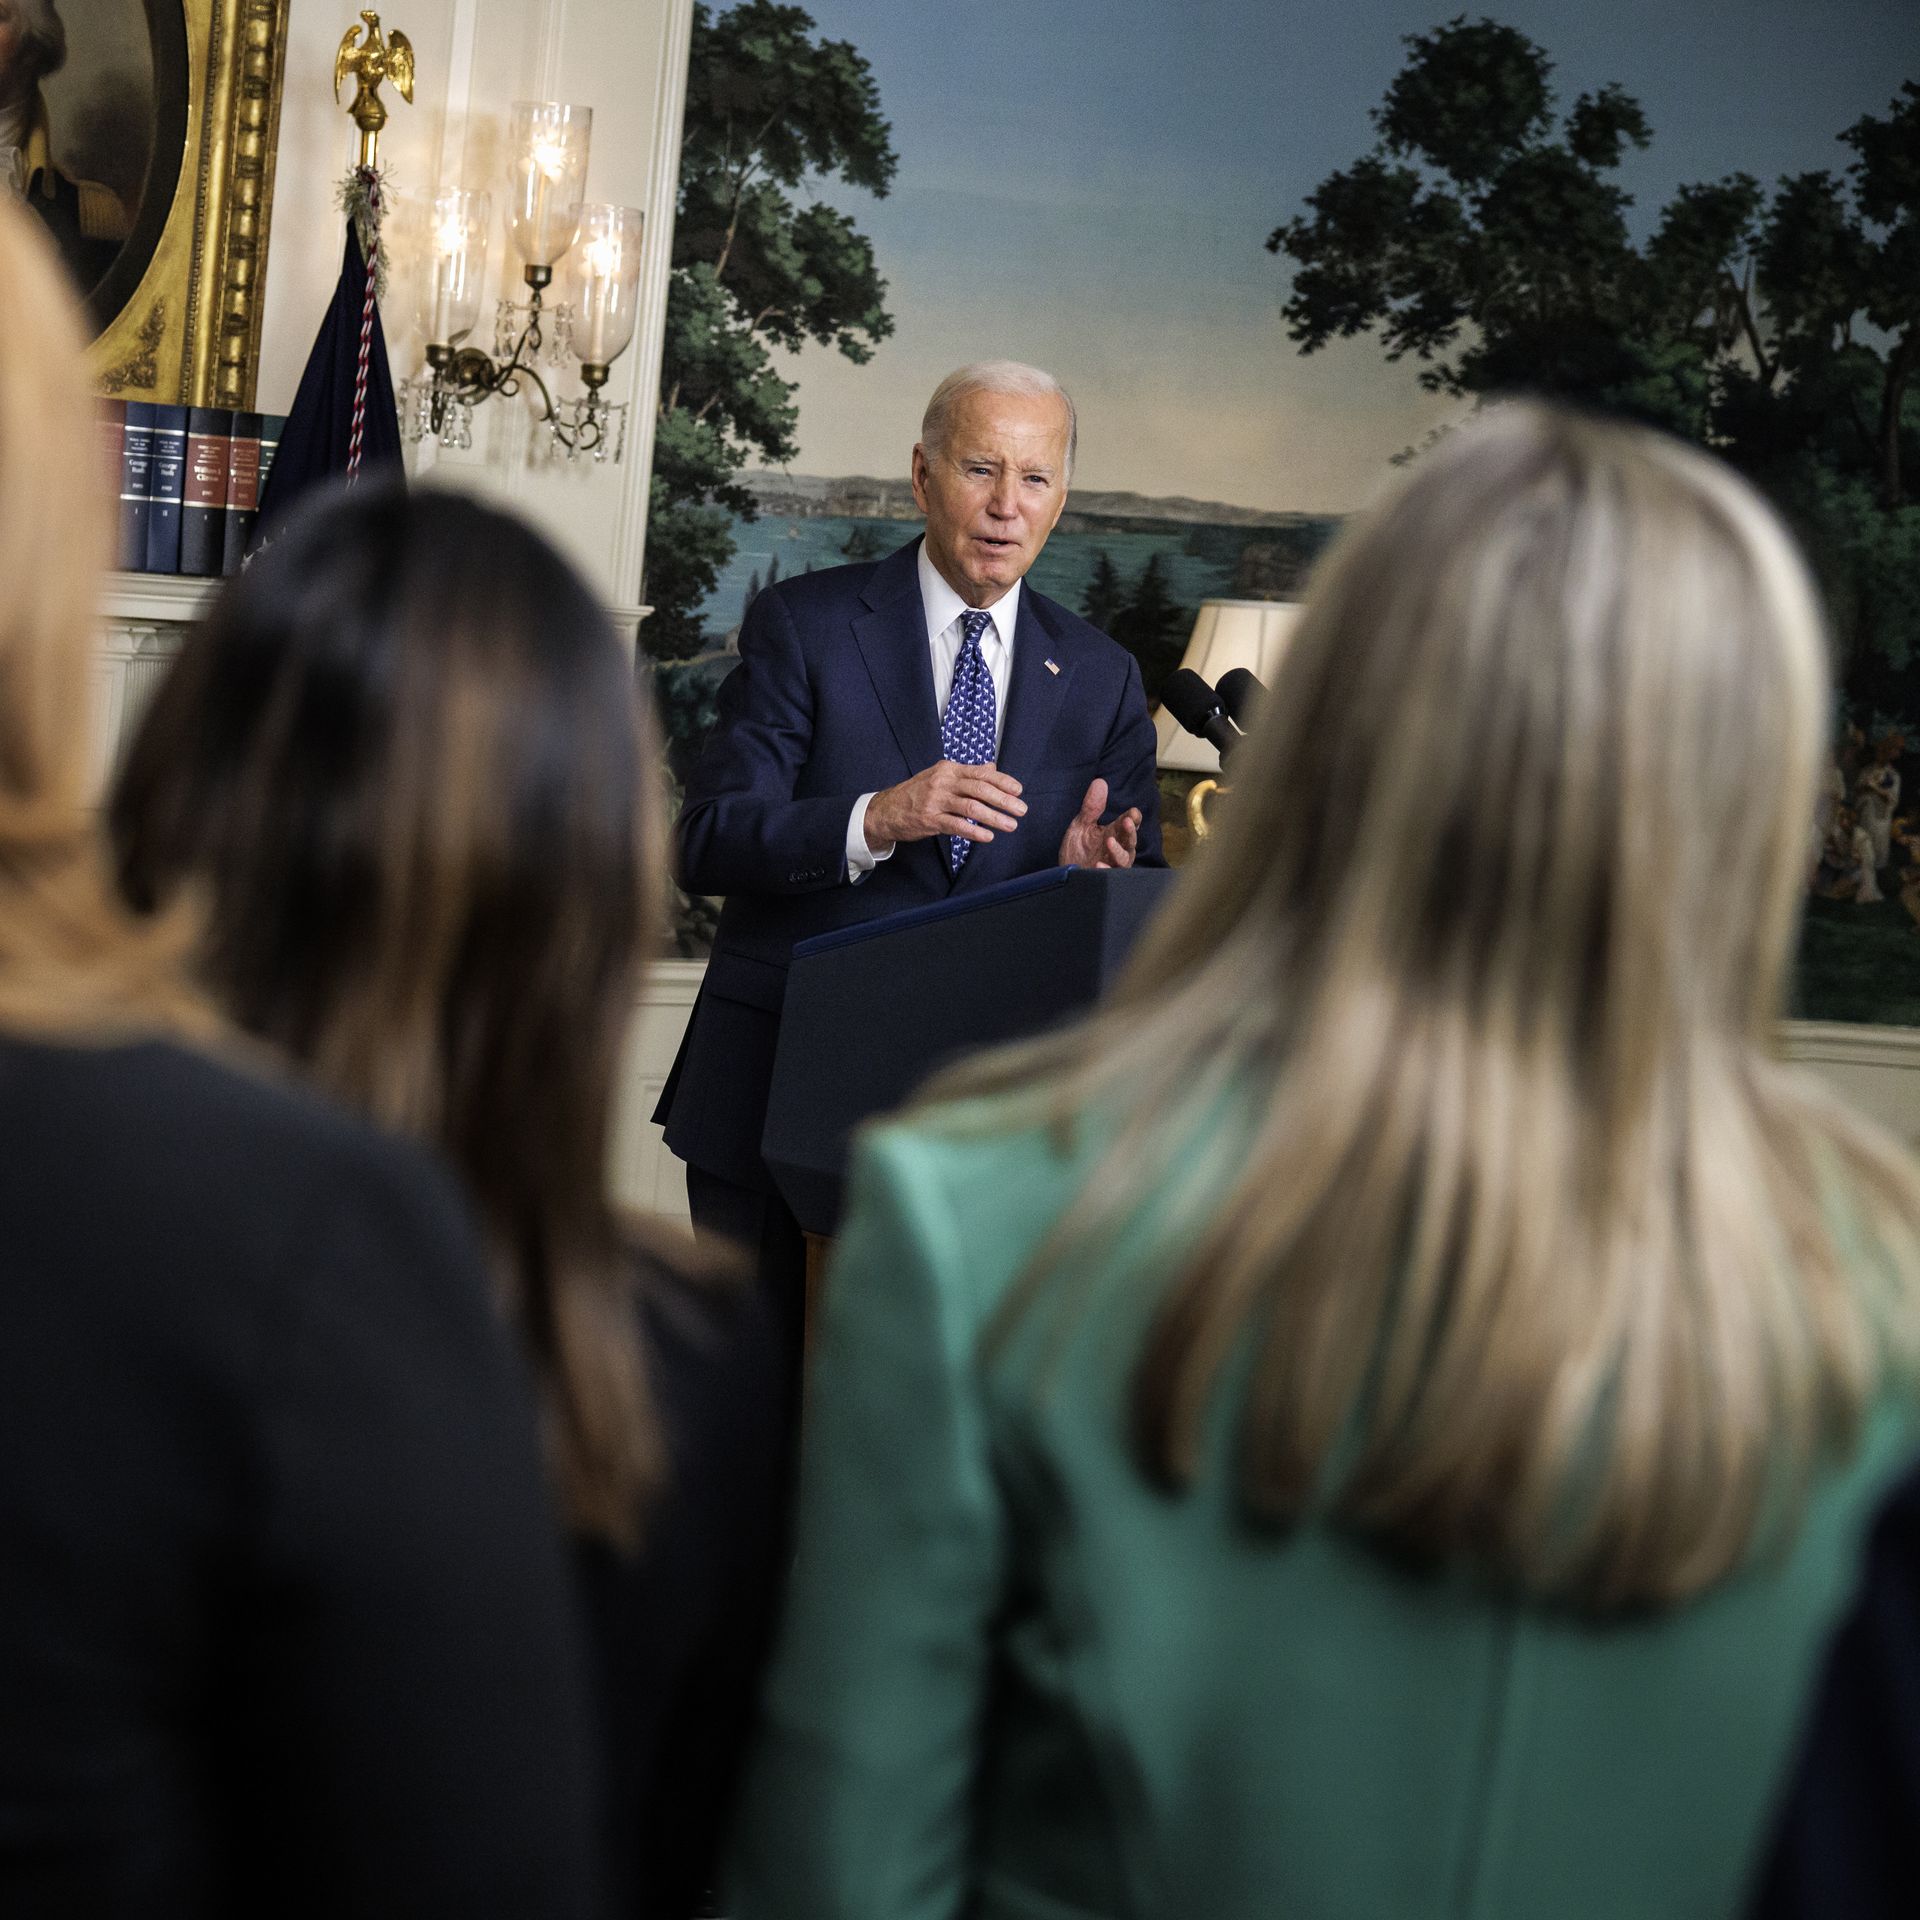 President Biden answers questions at a press conference